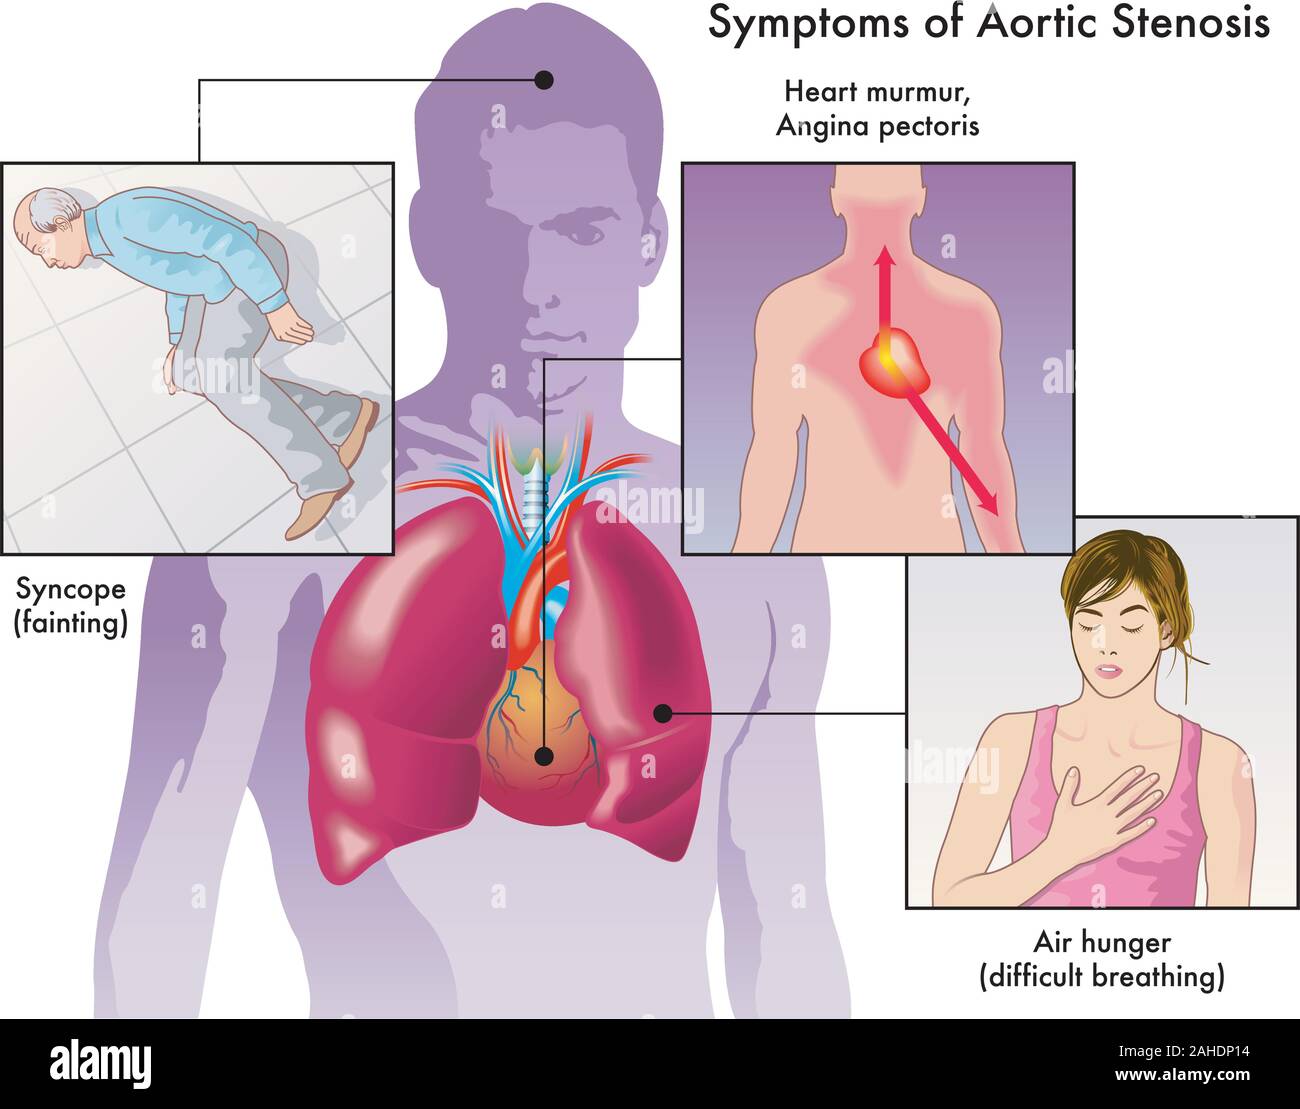 Medical illustration of the symptoms of aortic stenosis. Stock Vector